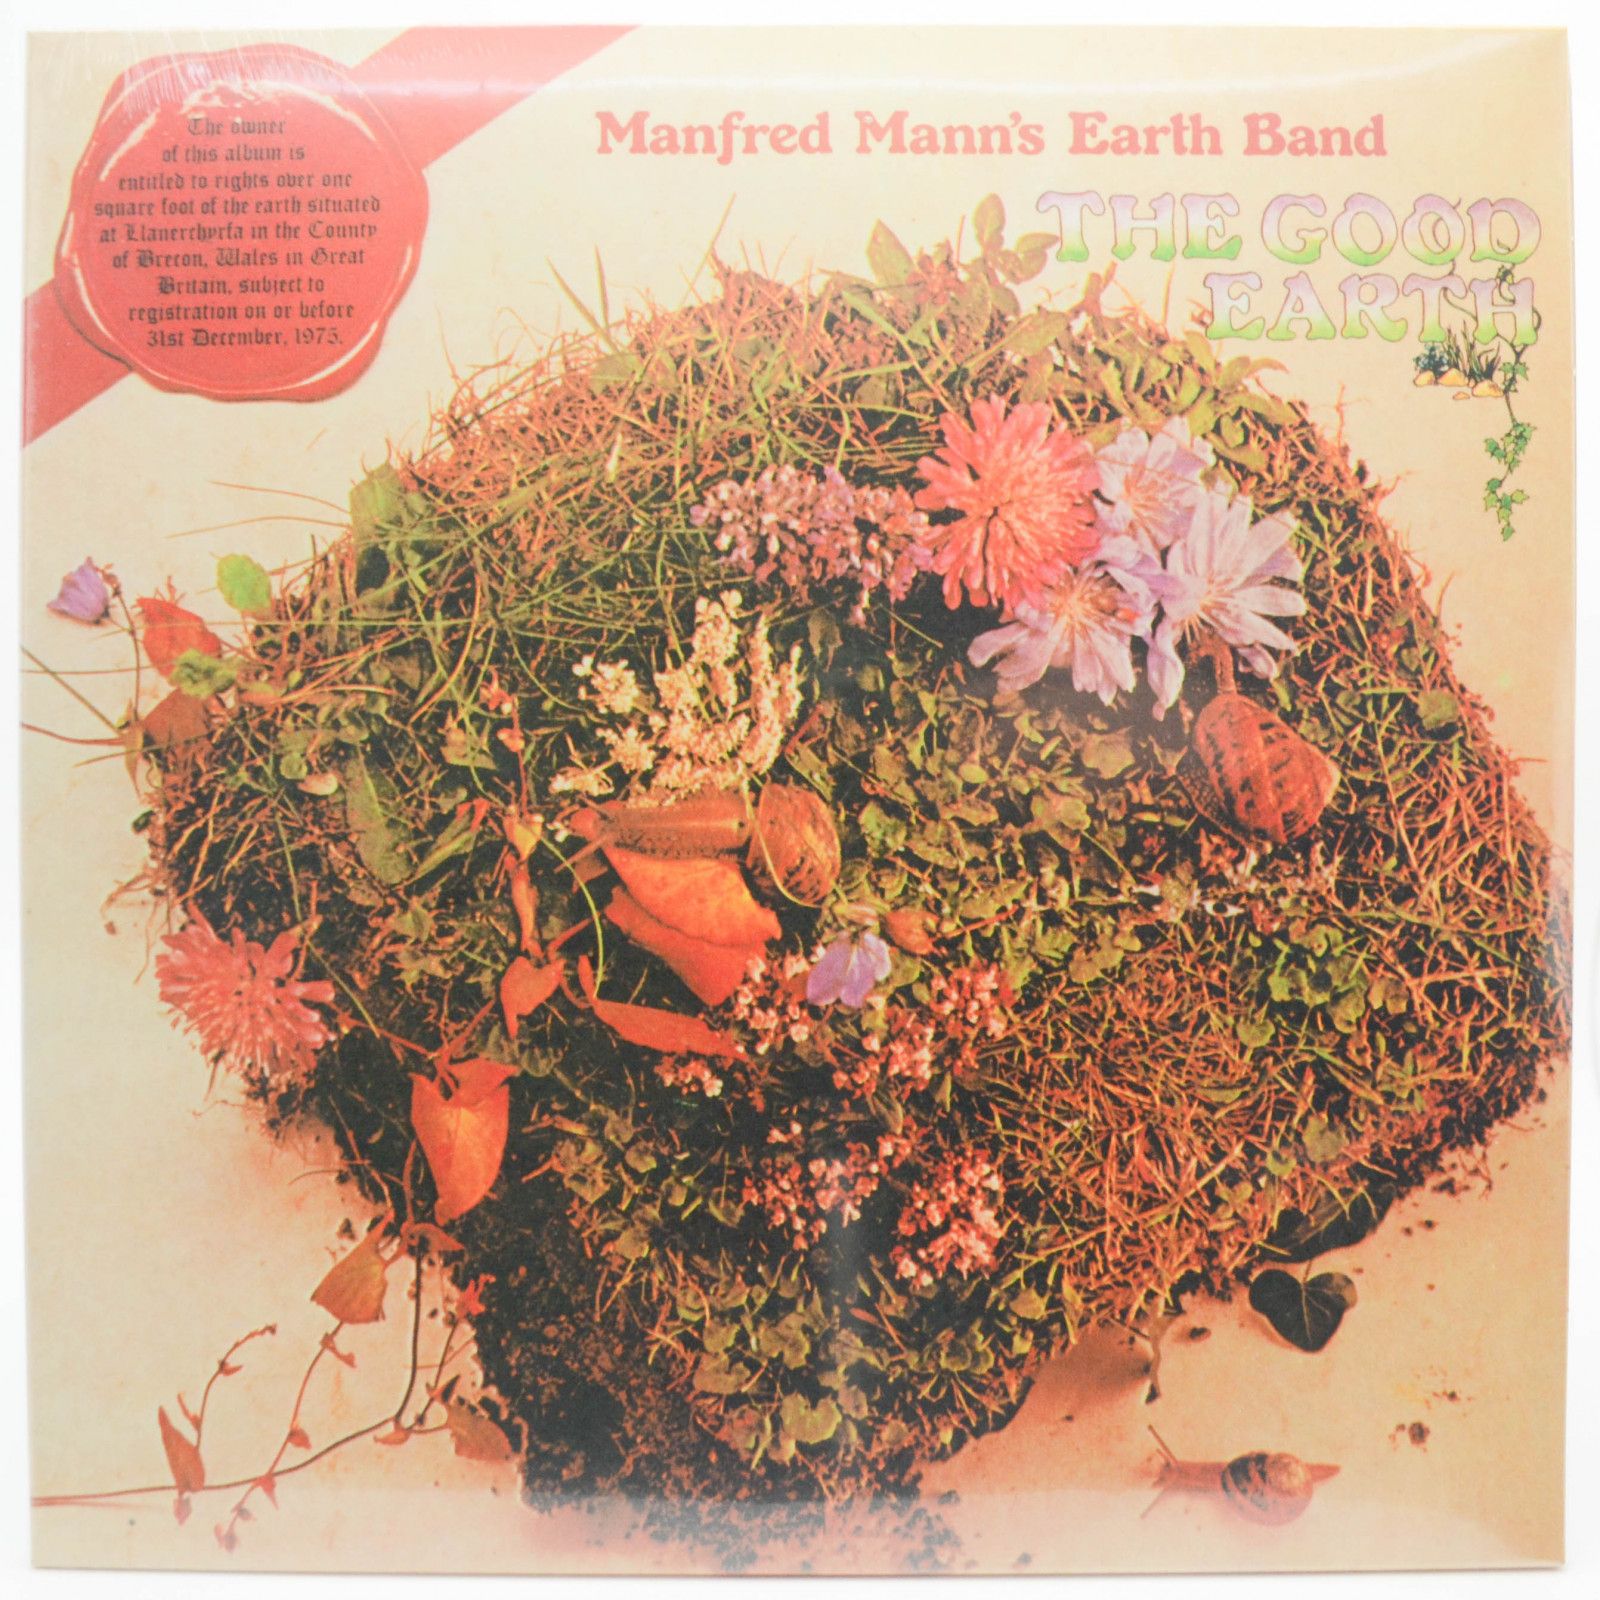 Manfred Mann's Earth Band — The Good Earth, 1974